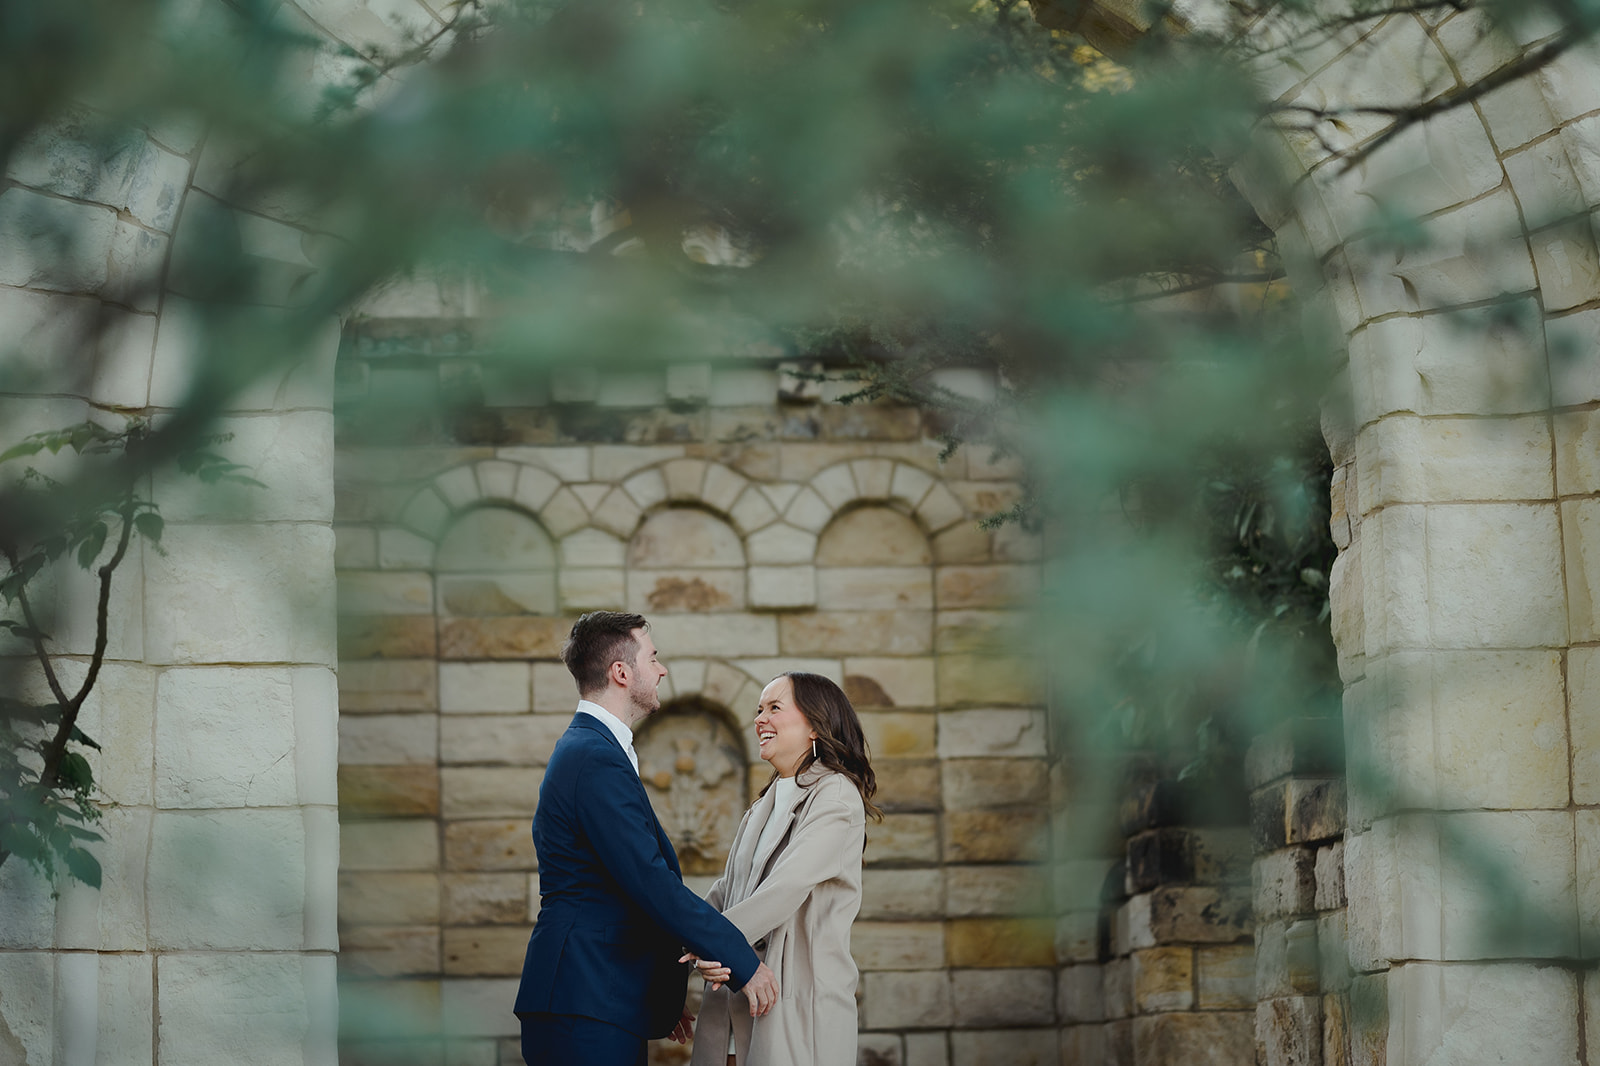 Engagement session shot showing couple's shared happiness at Bishop's Garden, Washington D.C.